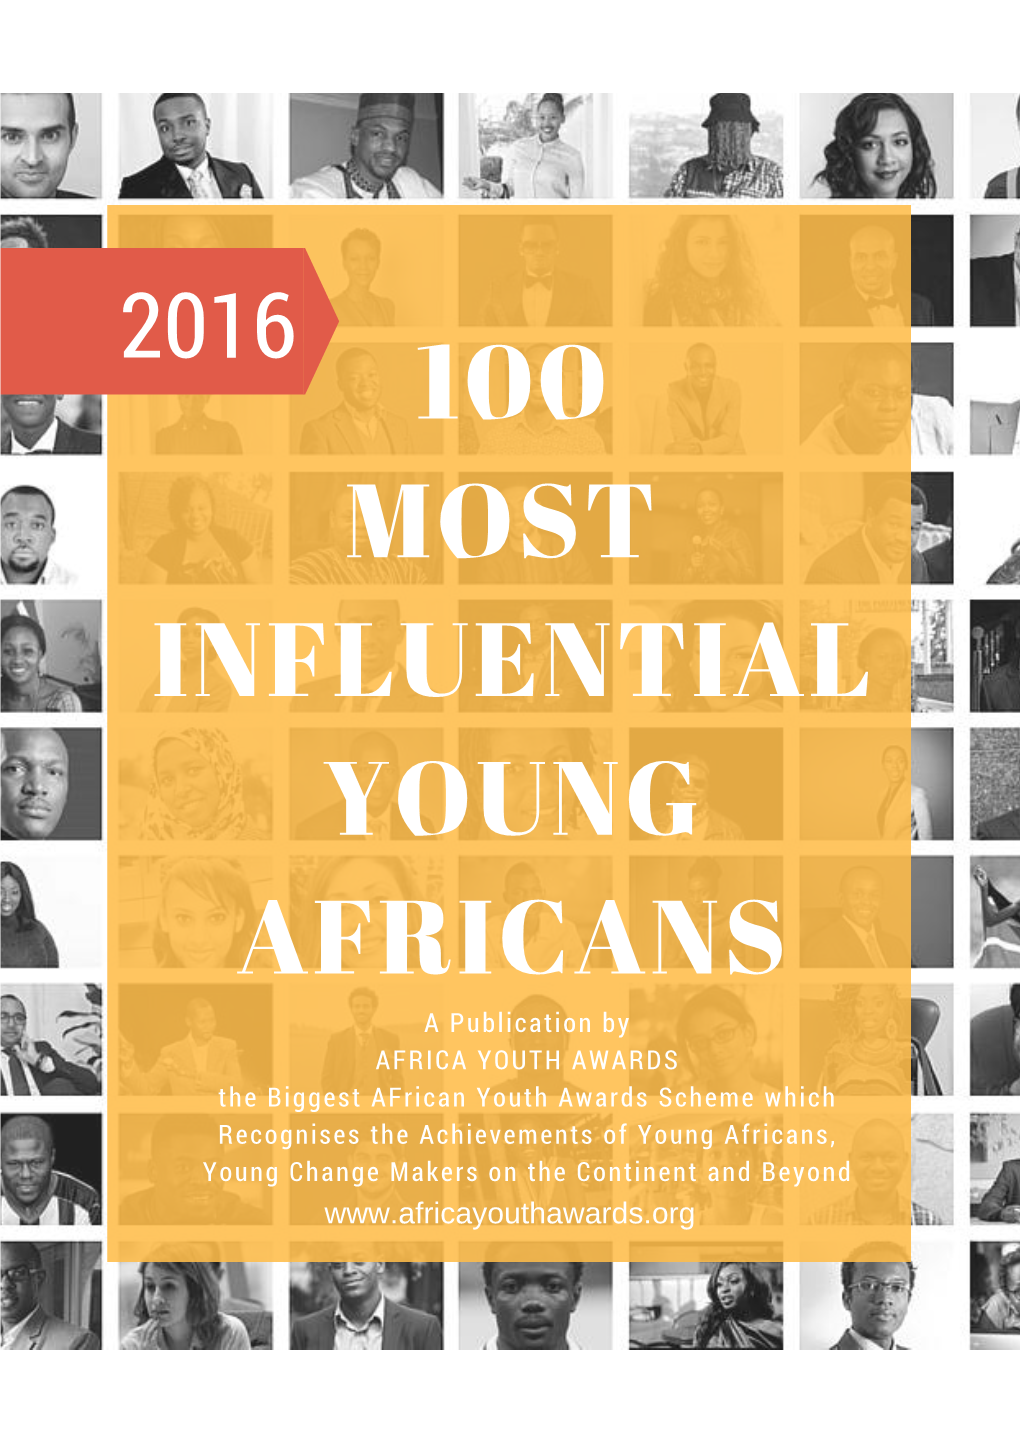 100 Most Influential Young Africans E-Brochure